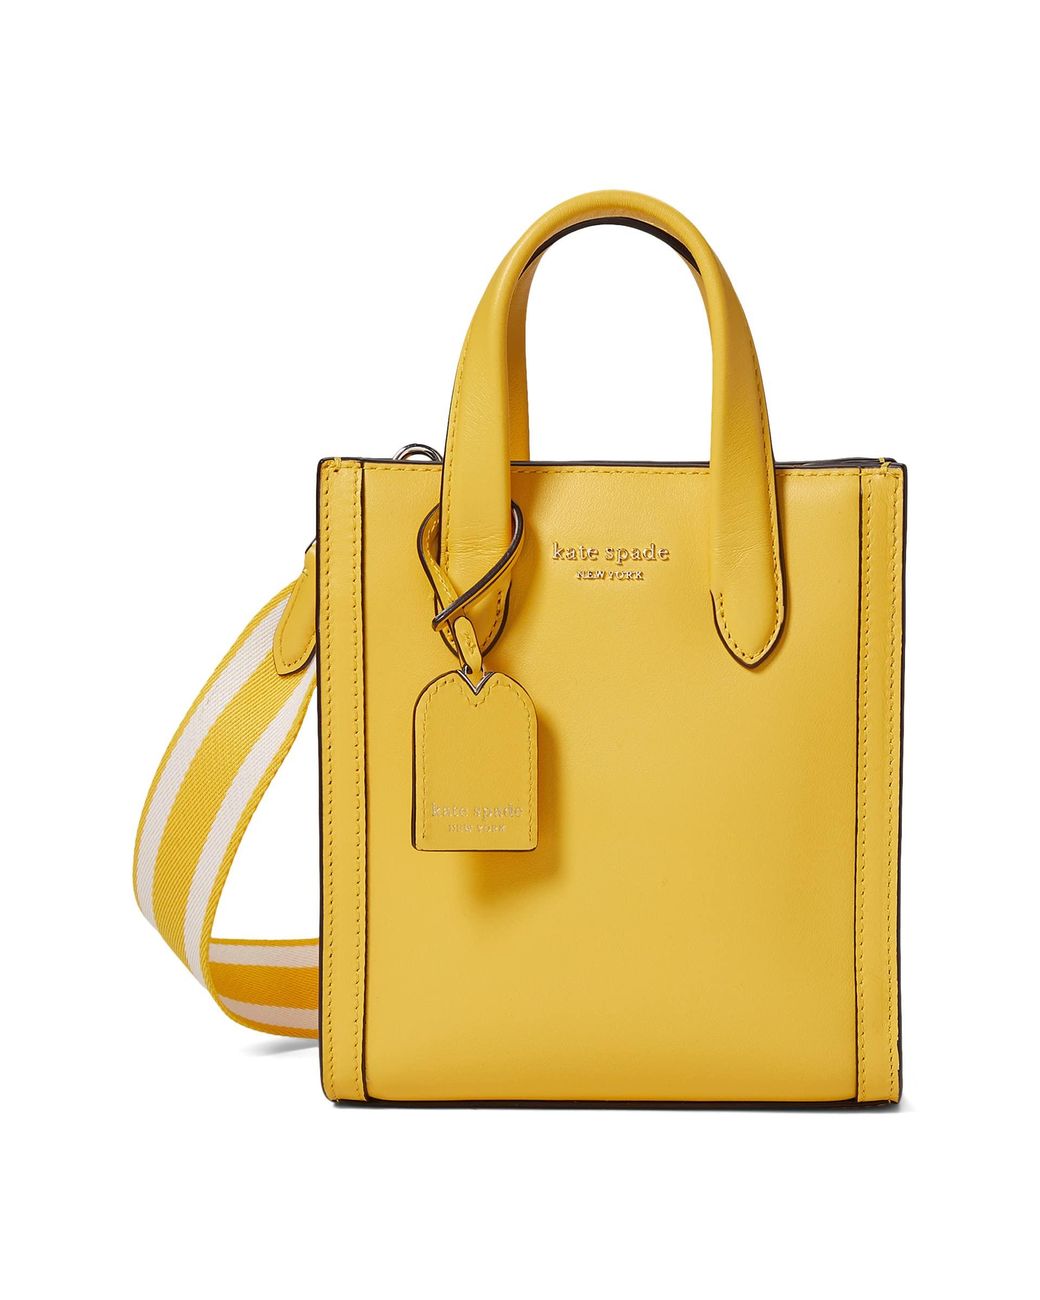 Kate Spade Manhattan Smooth Leather Mini Tote in Yellow | Lyst